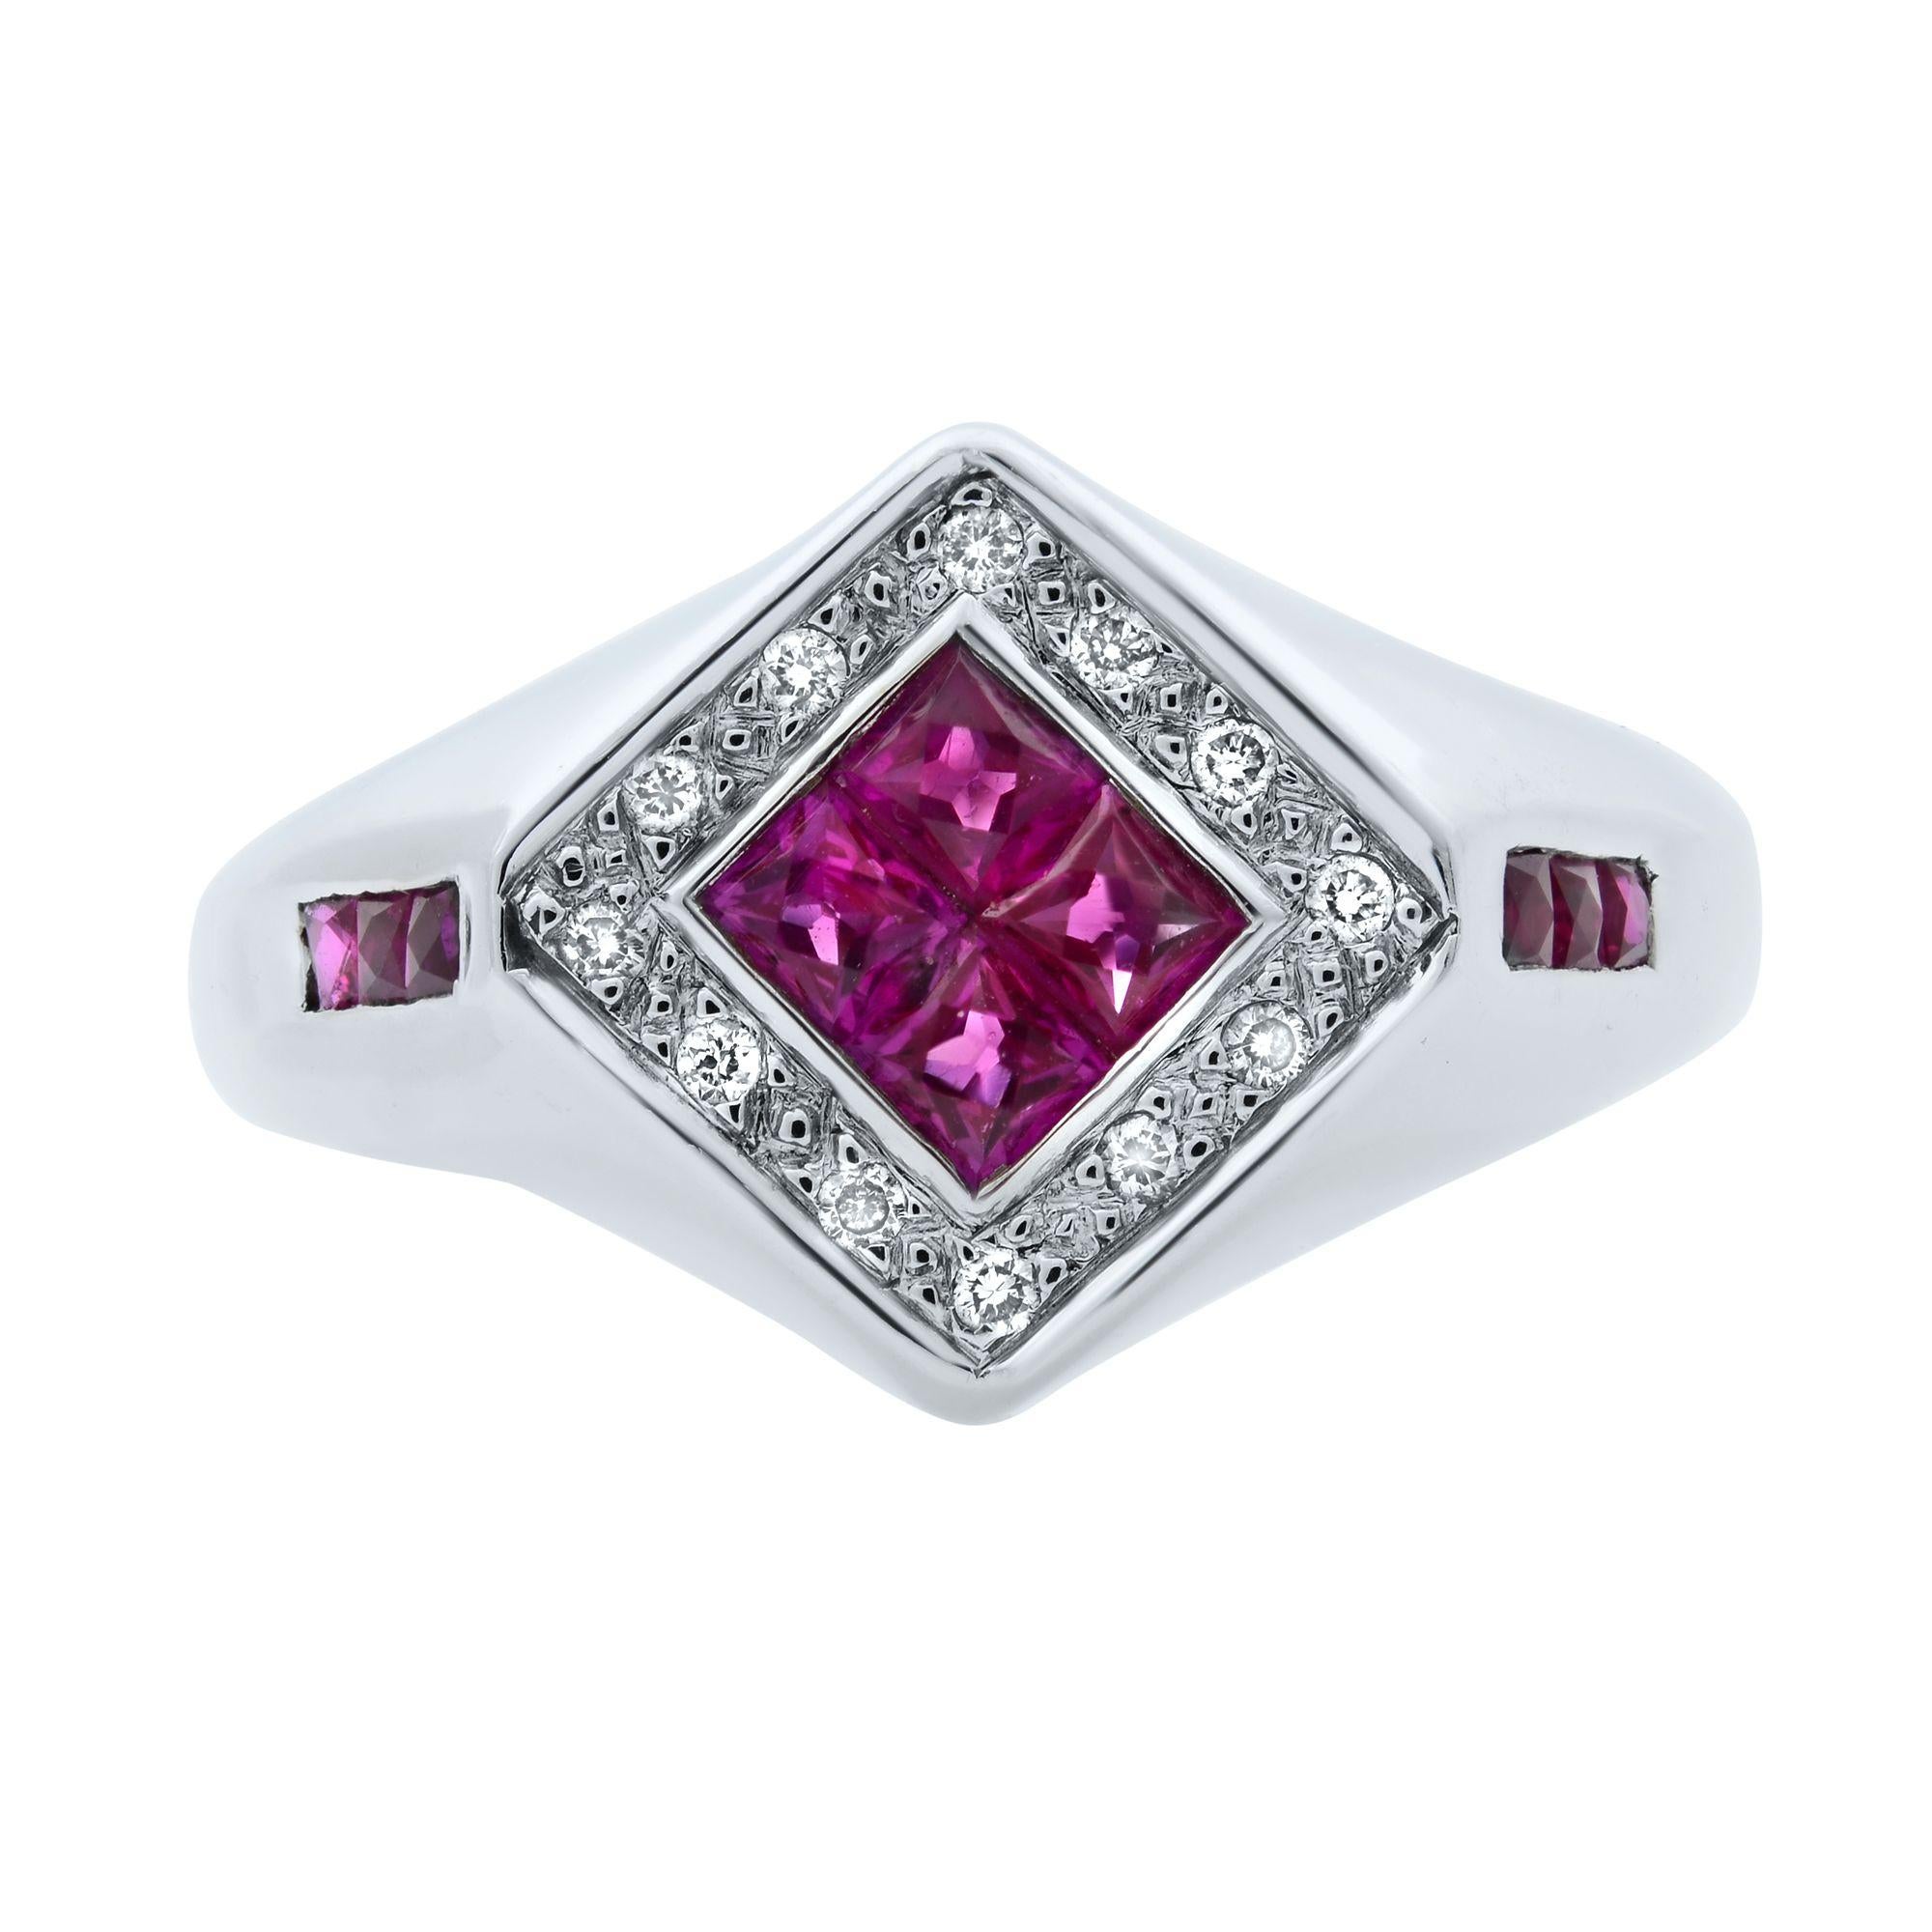 This cocktail ring holds 4 princess cut pink rubies at the center and 3 tiny rubies on each side of the shank. The halo is set with tiny diamonds. This unique design is crafted in 14k white gold with ring size 7. The total carat weight of rubies is